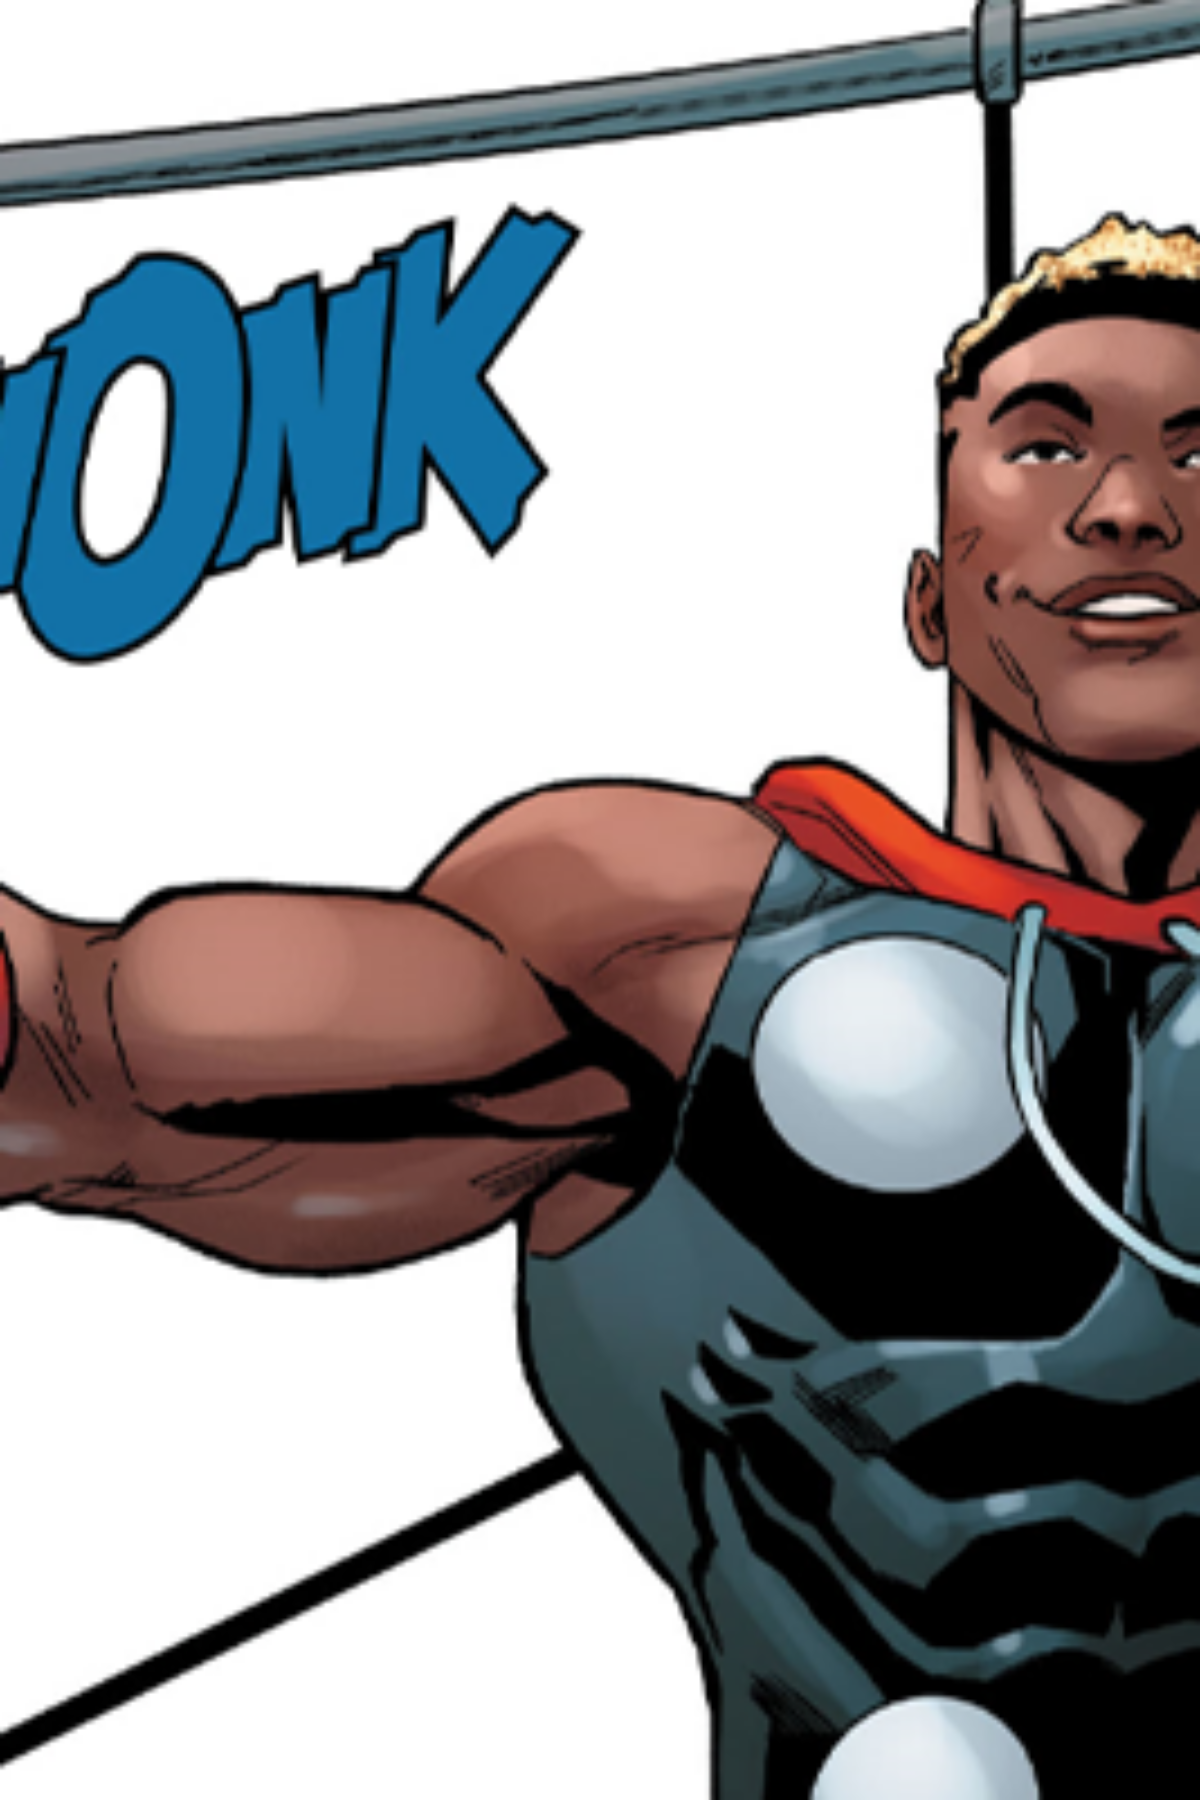 Source: What If… Miles Morales Vol. 1 #4 “What if…Mile Morales became Thor?” (2022), Marvel Comics. Words by Yehudi Mercado, art by Luigi Zagaria and Chris Sotomayor.